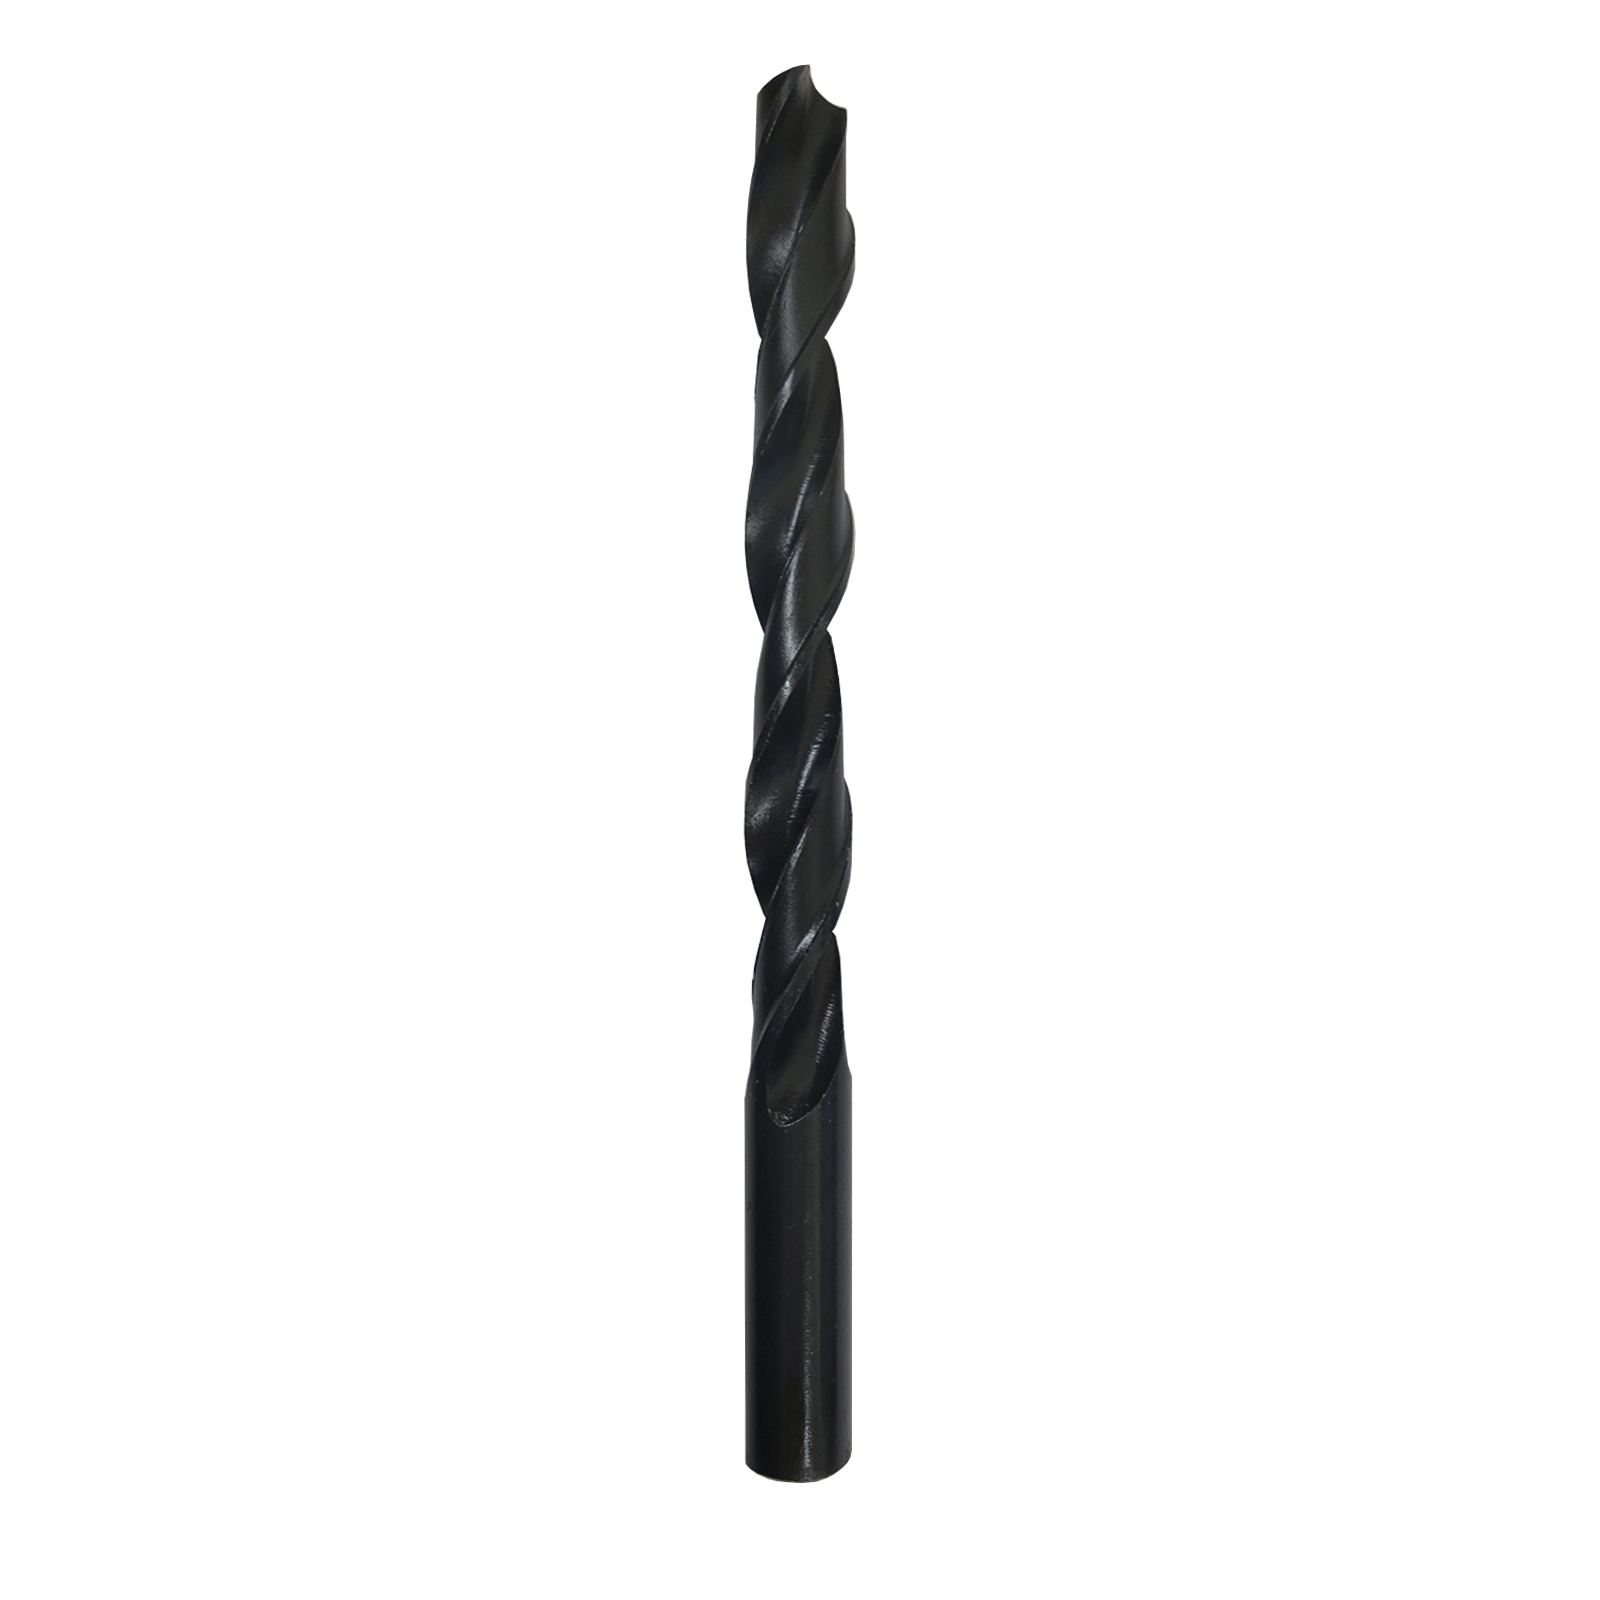 Gyros 45-42017 Premium (Made in US) Industrial Grade HSS Black Oxide Metric Drill Bit, 1.2 mm, Pack of 12